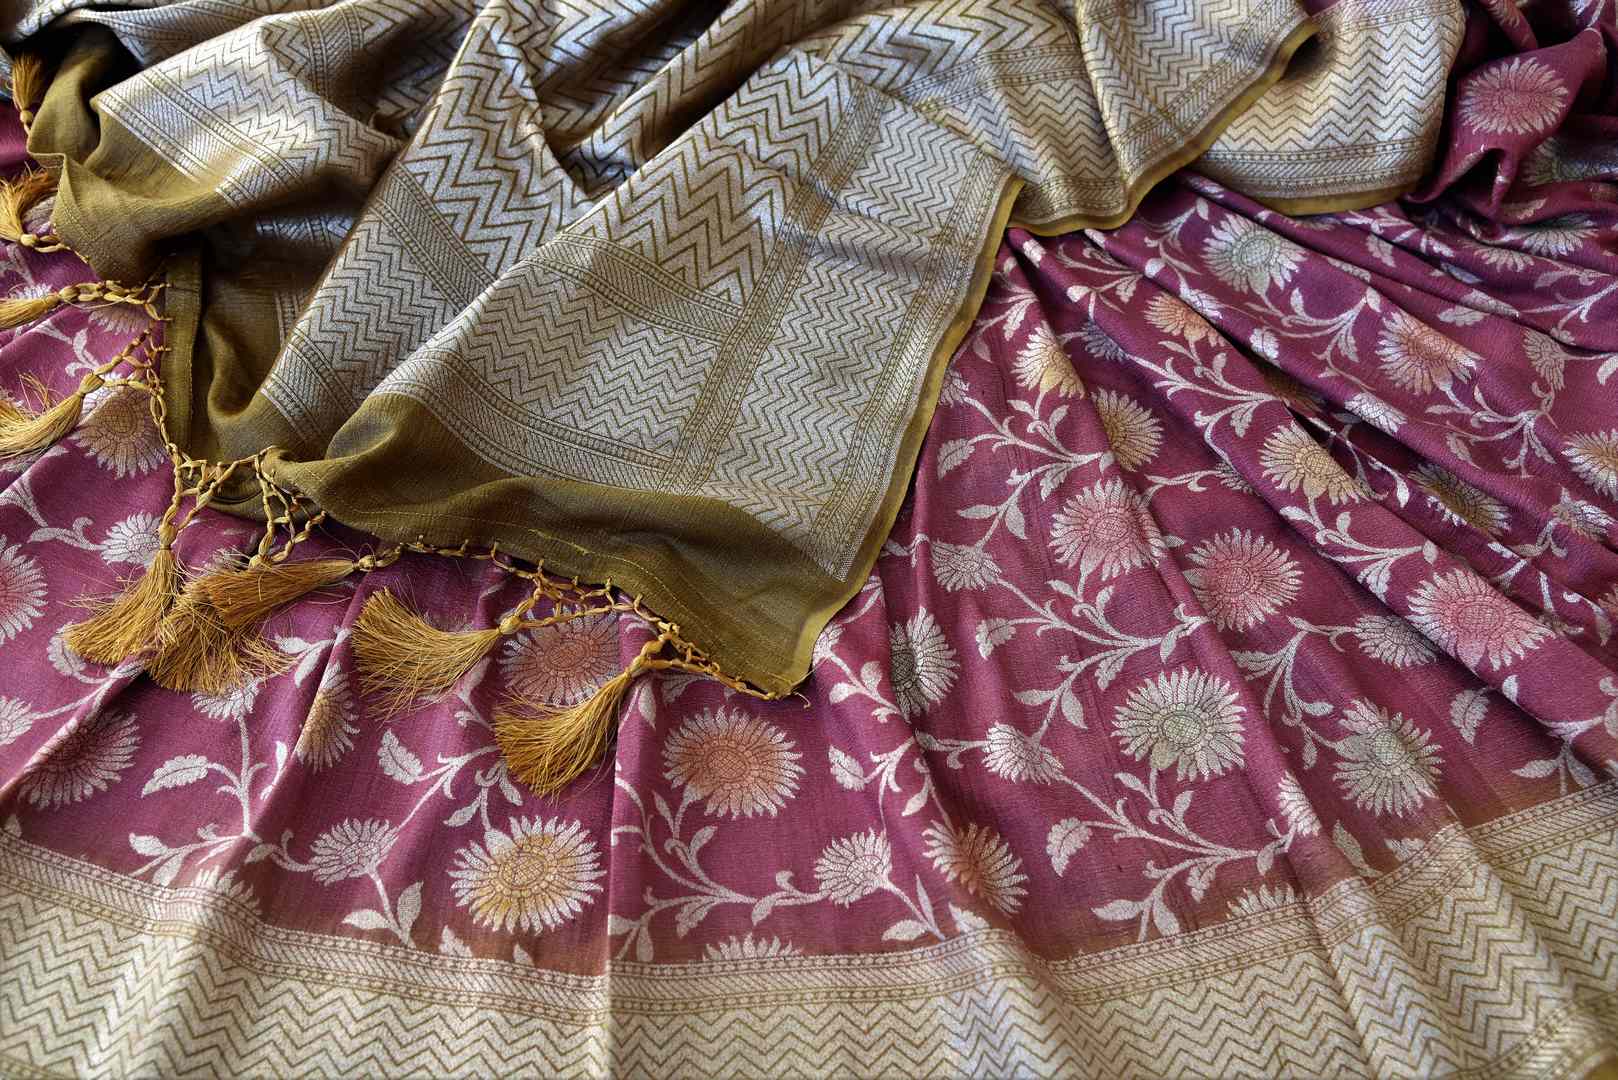 Buy wine color khaddi Benarasi saree online in USA with brown zari border. Feel traditional on special occasions in beautiful Indian designer sarees from Pure Elegance Indian fashion store in USA. Choose from a splendid variety of Banarasi sarees, pure handwoven saris. Buy online.-details